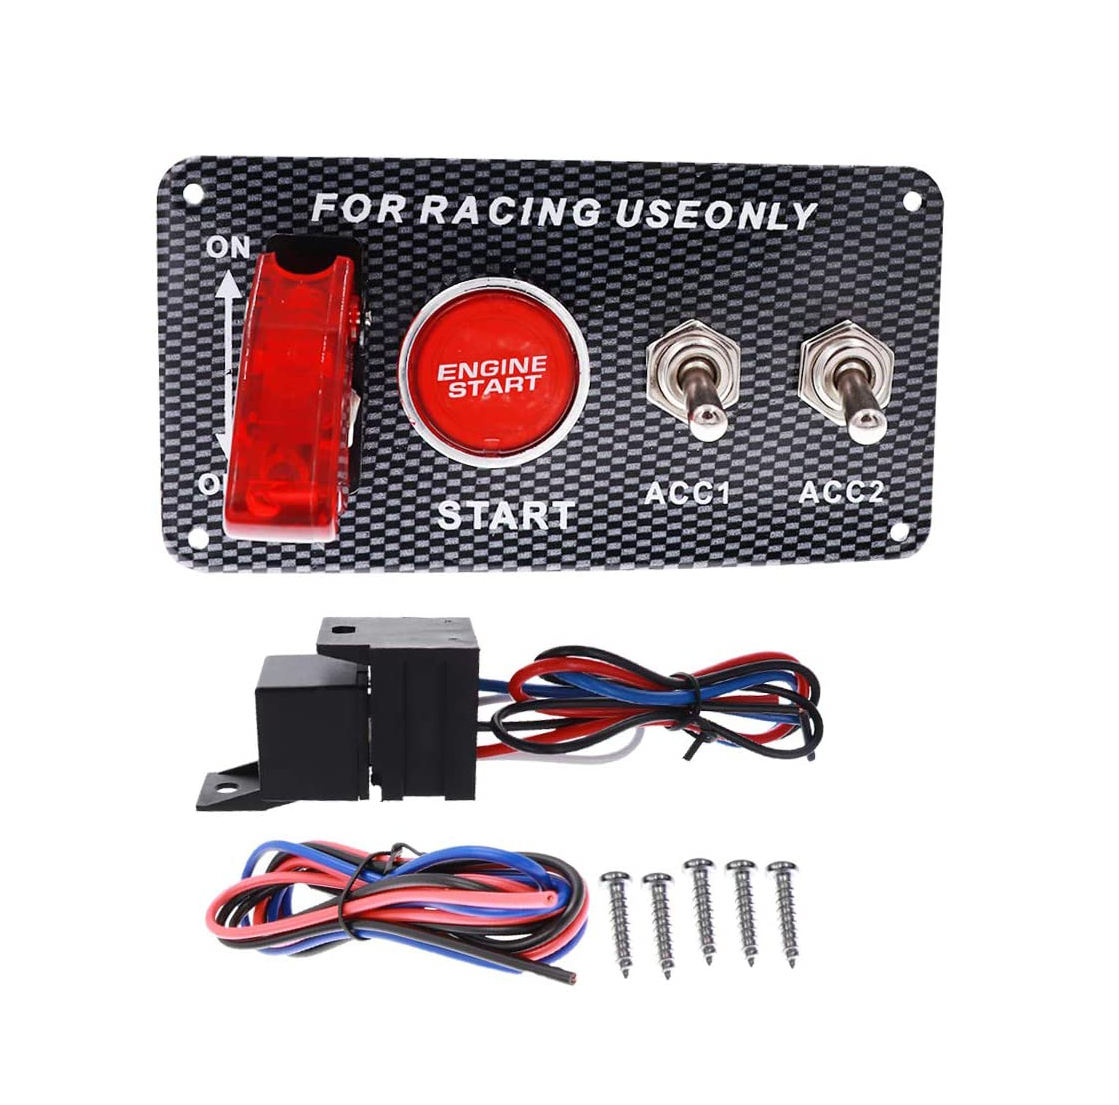 OEM 4 gang Toggle switch RACING PANEL 12V WITH ENGINE START AIRCRAFT TYPE  Manufacturer and Supplier